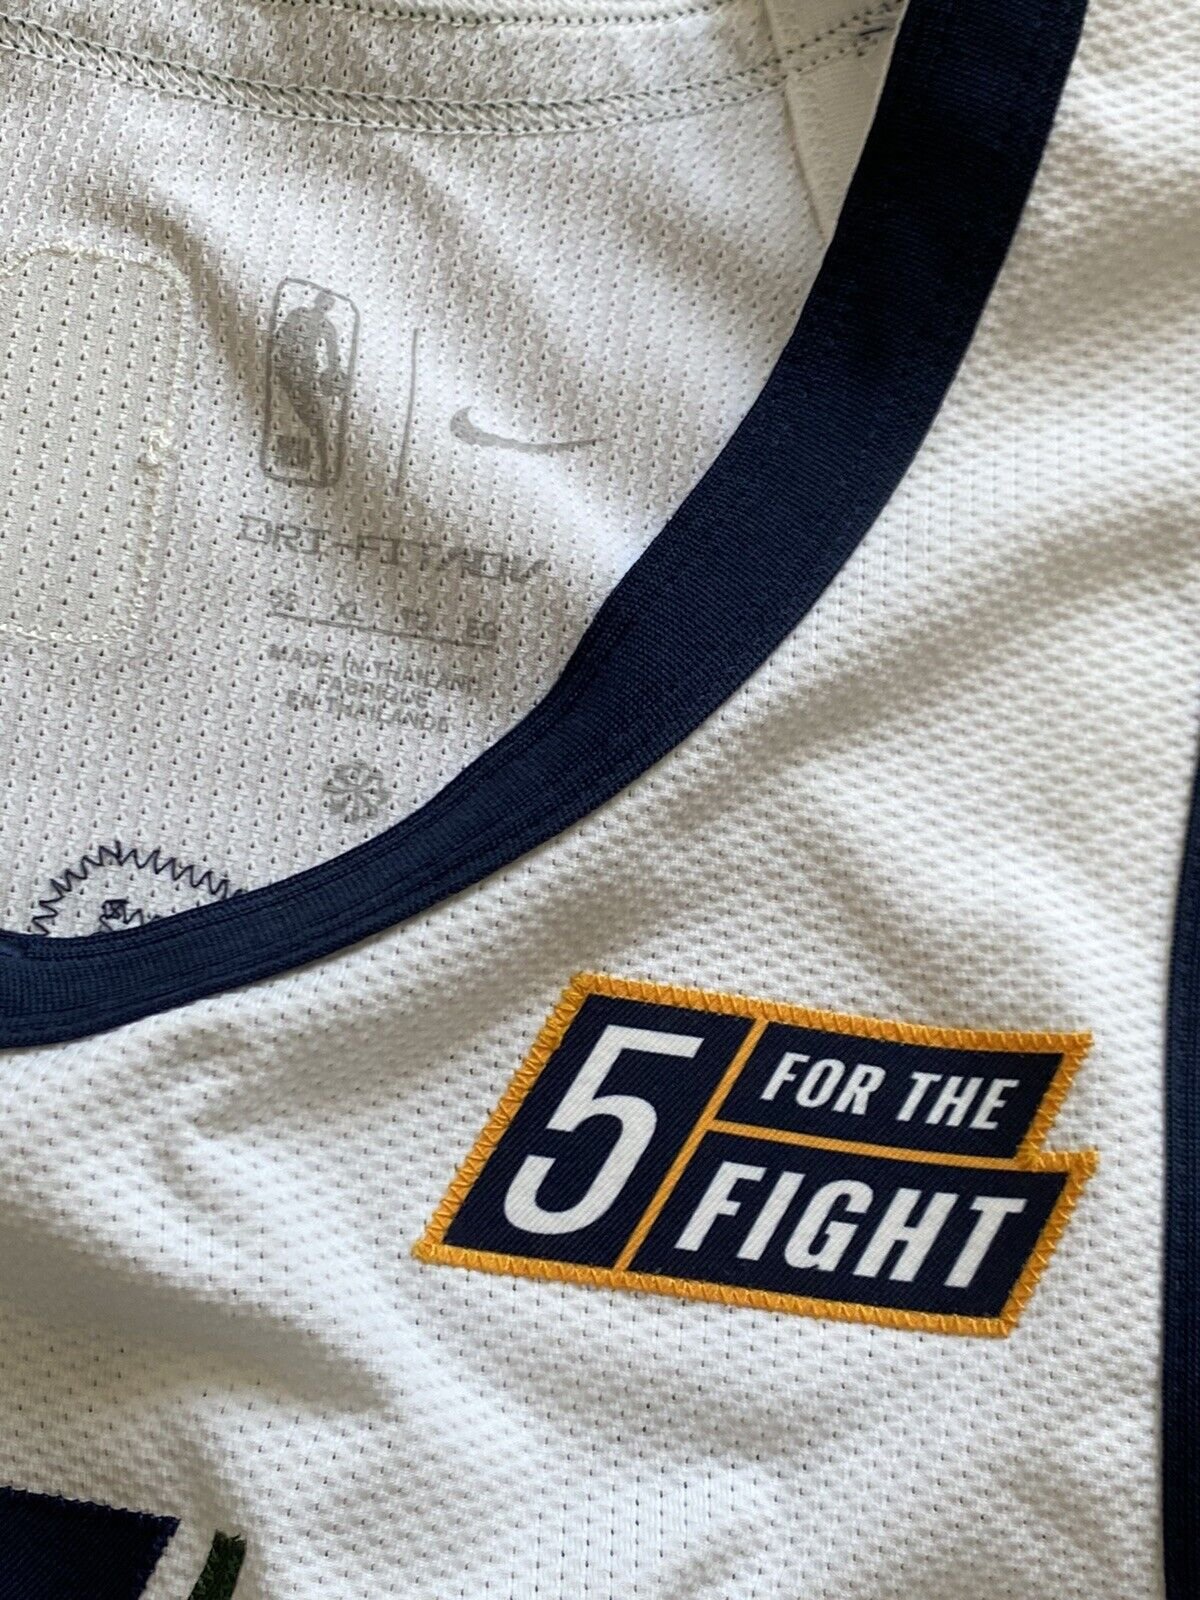 Eric Paschall Utah Jazz Game-Used #0 White Jersey vs. Golden State